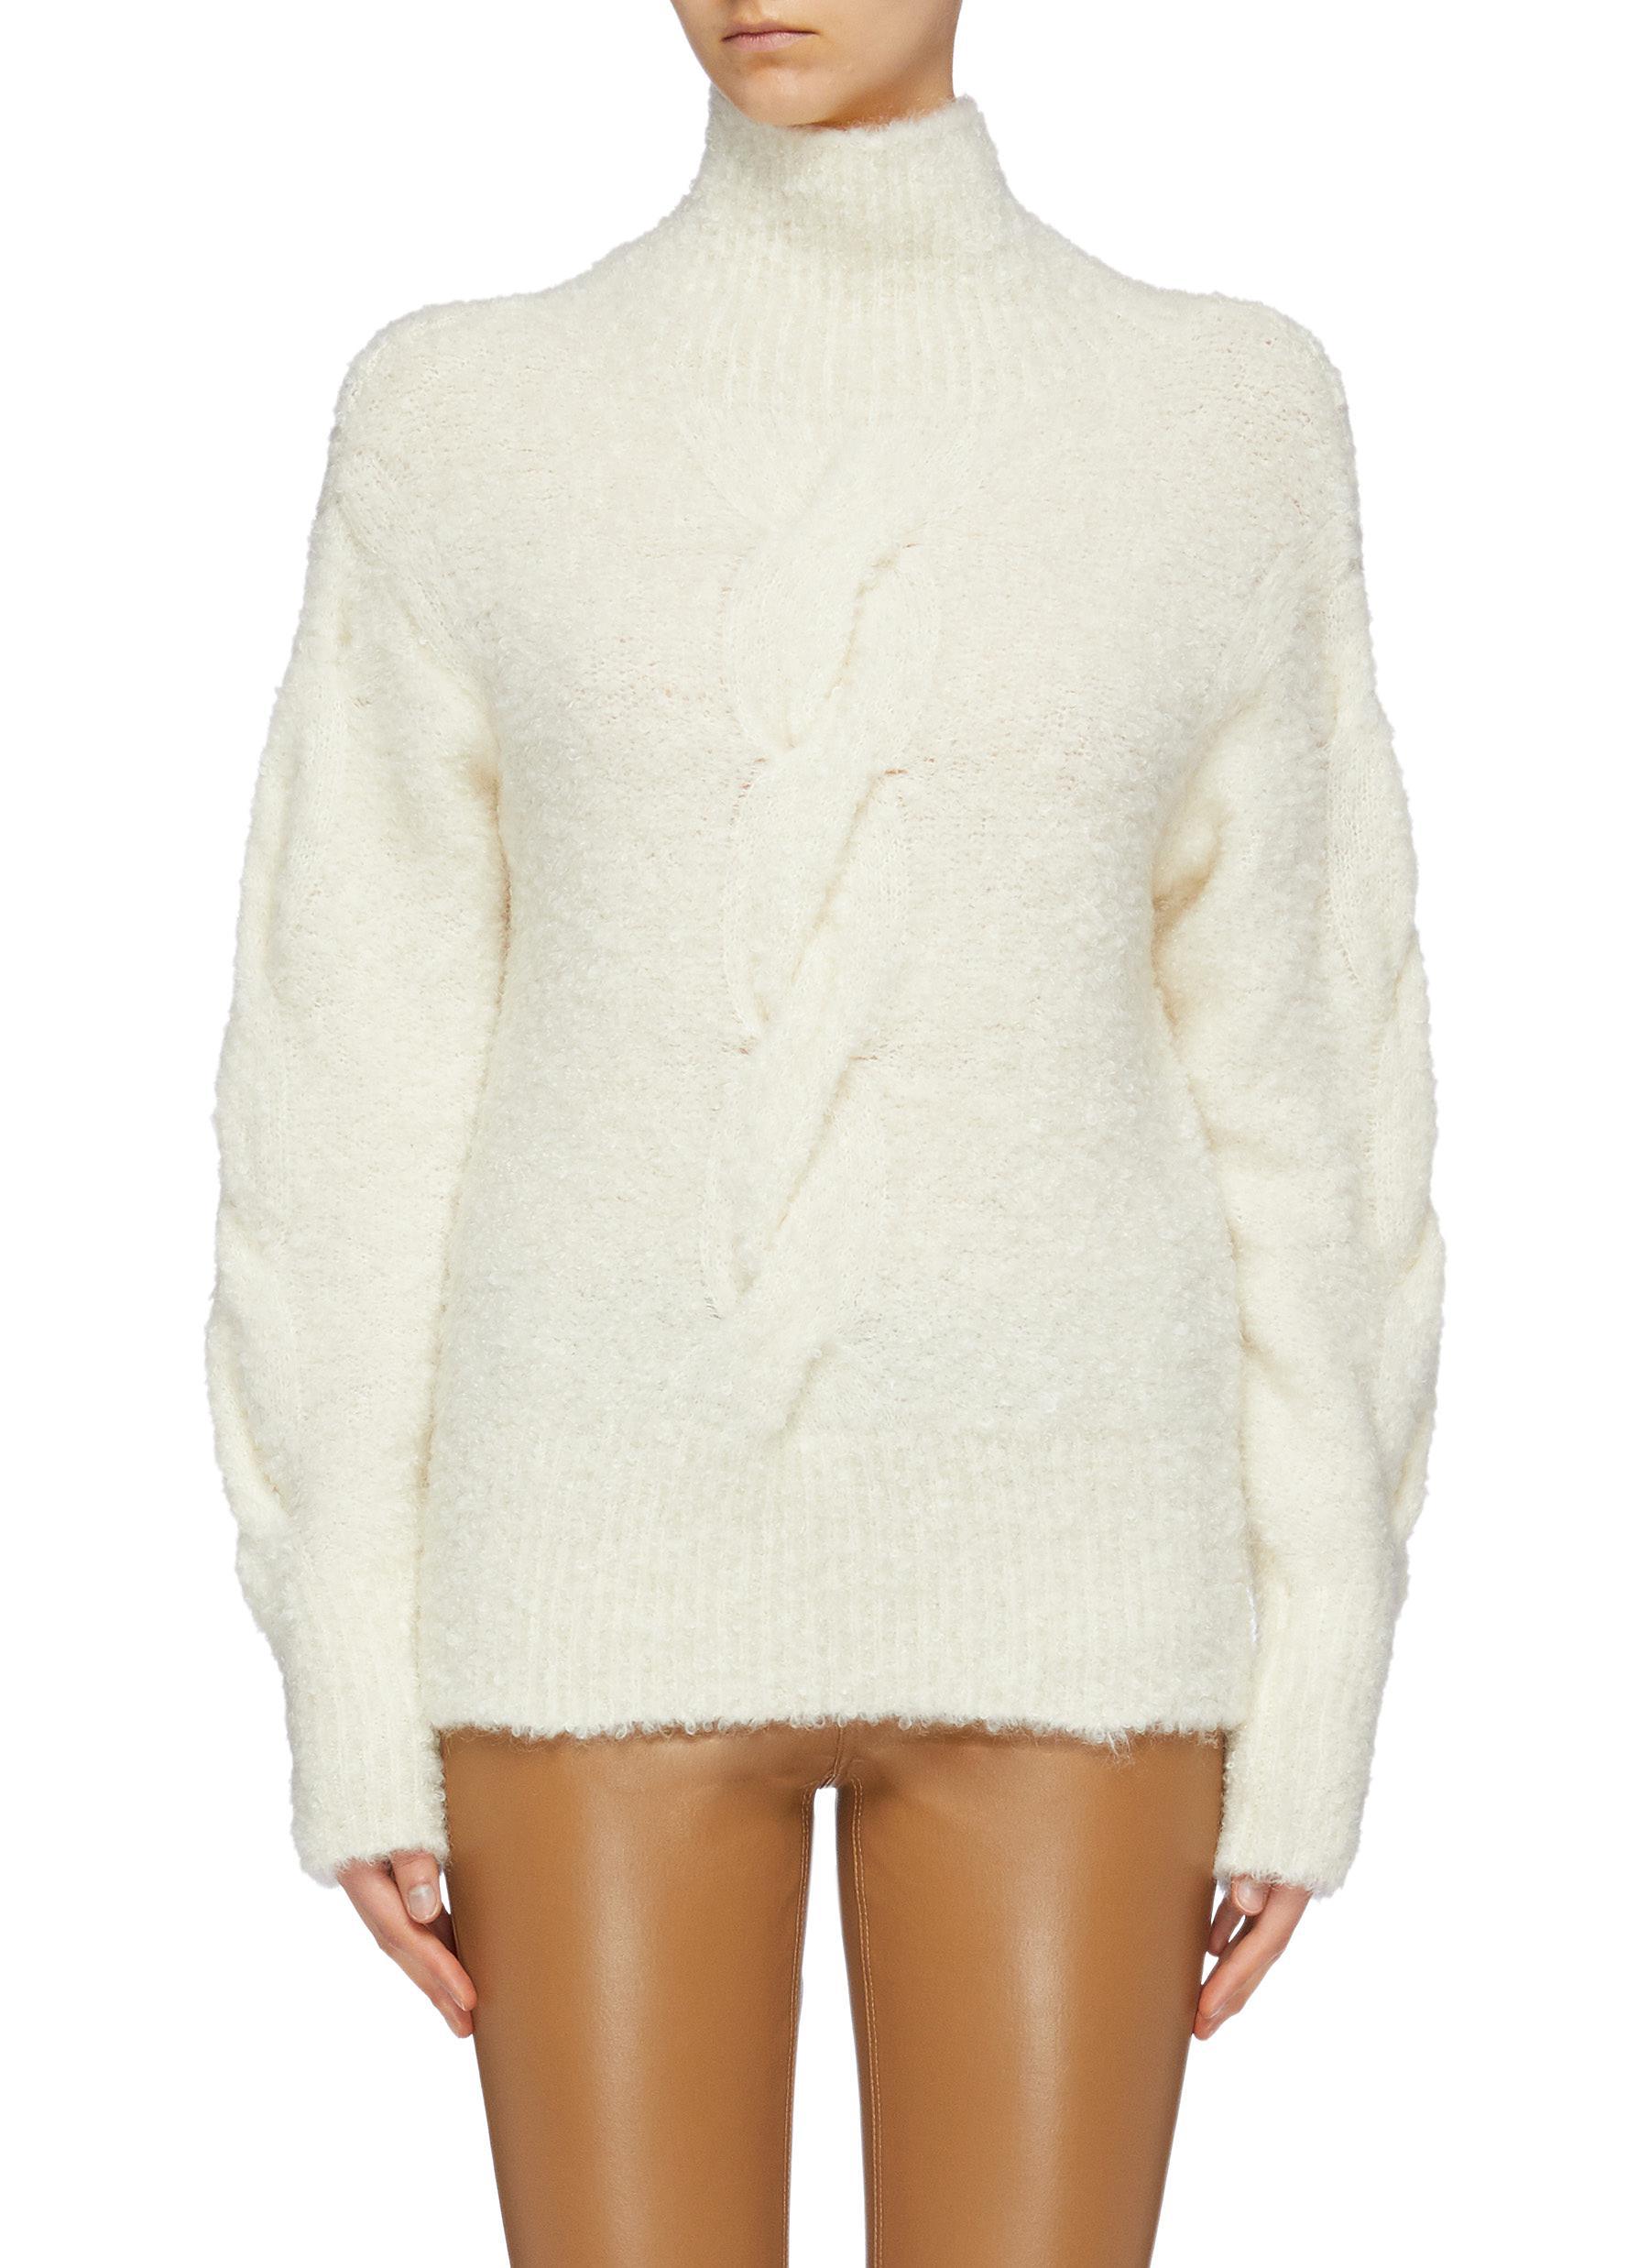 Theory Synthetic Bouclé Knit Oversized Turtleneck Sweater in White - Lyst